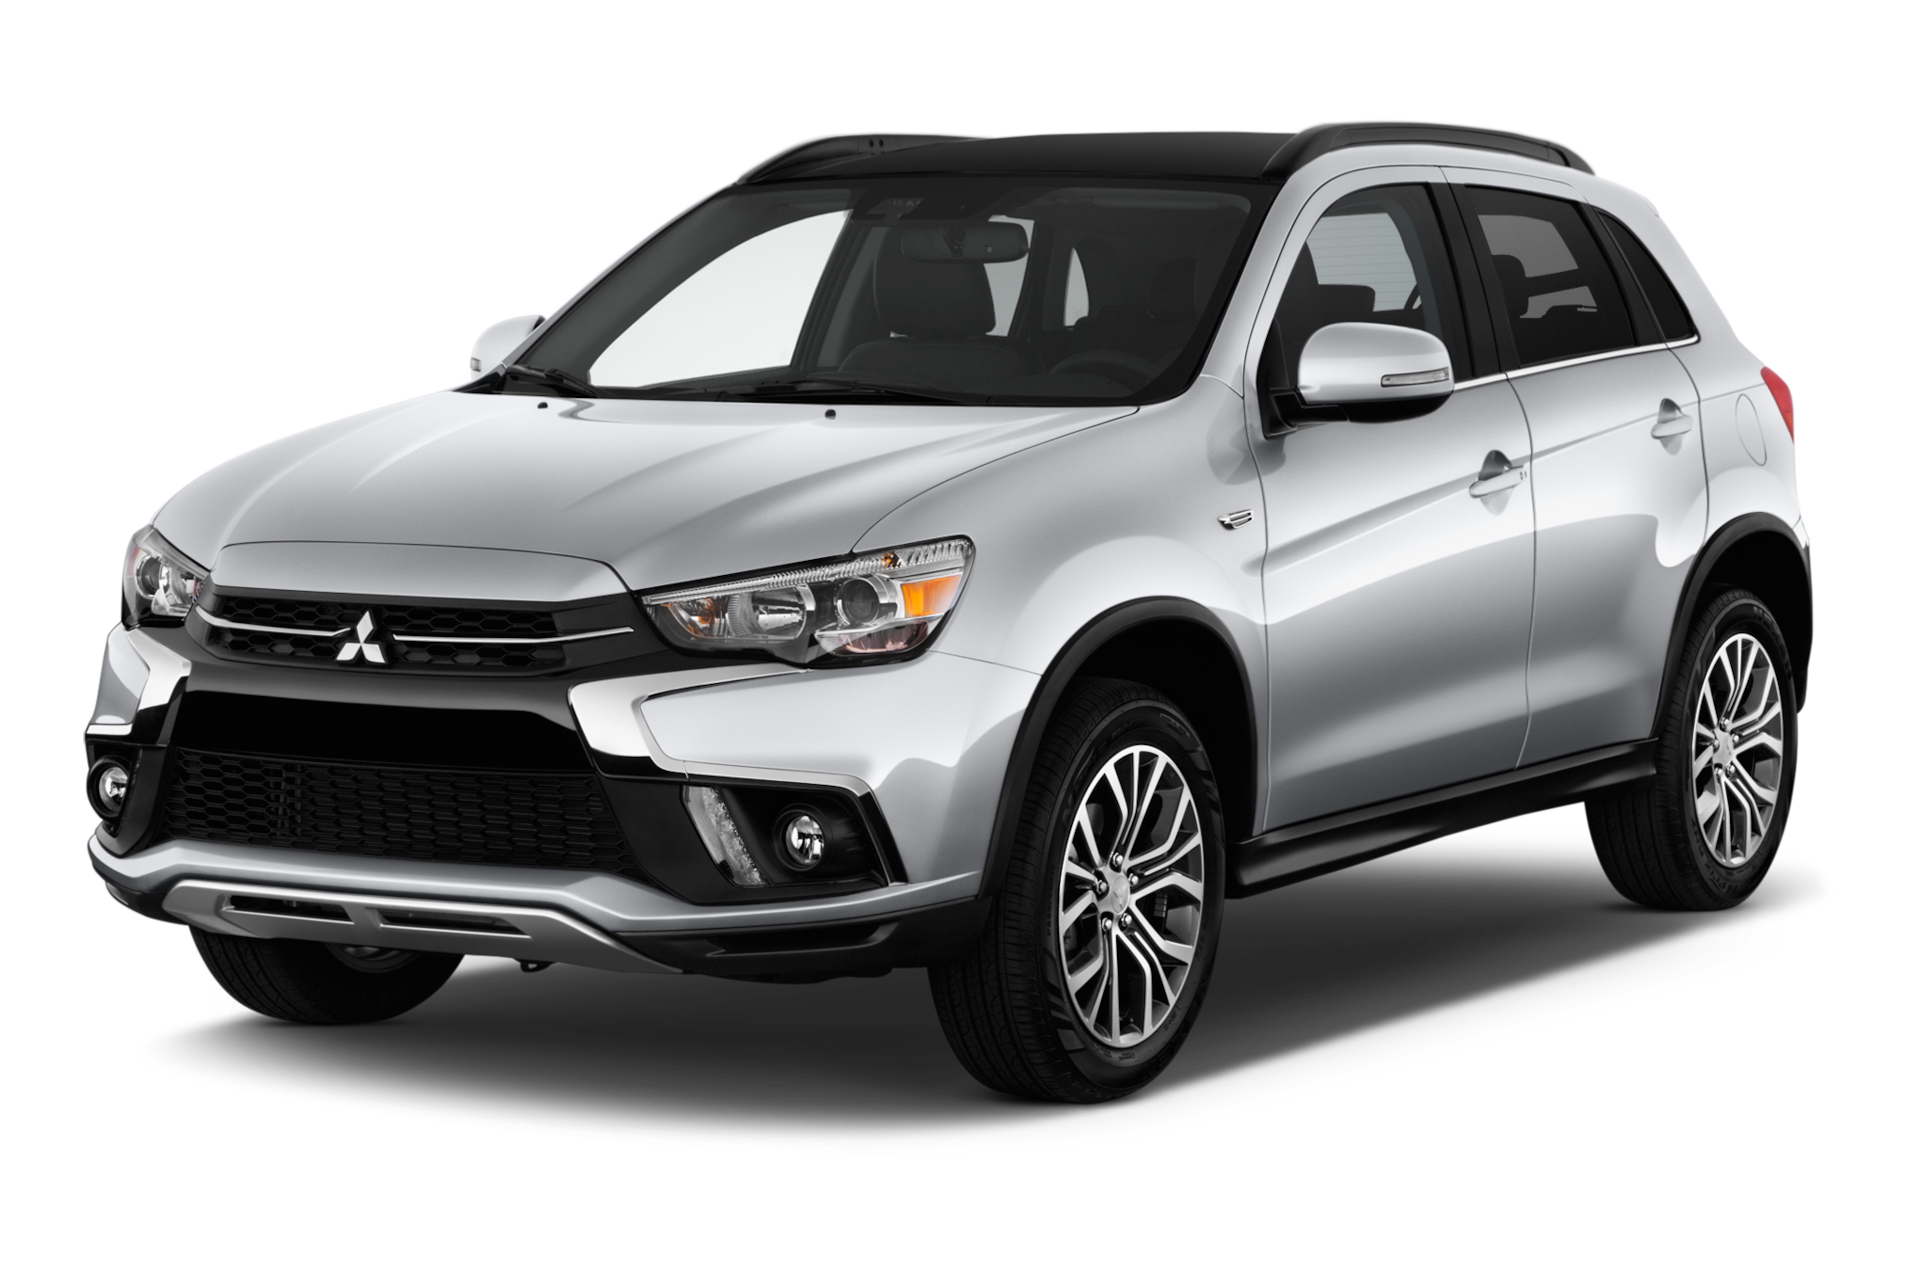 2019 Mitsubishi Outlander Sport Prices, Reviews, and Photos - MotorTrend